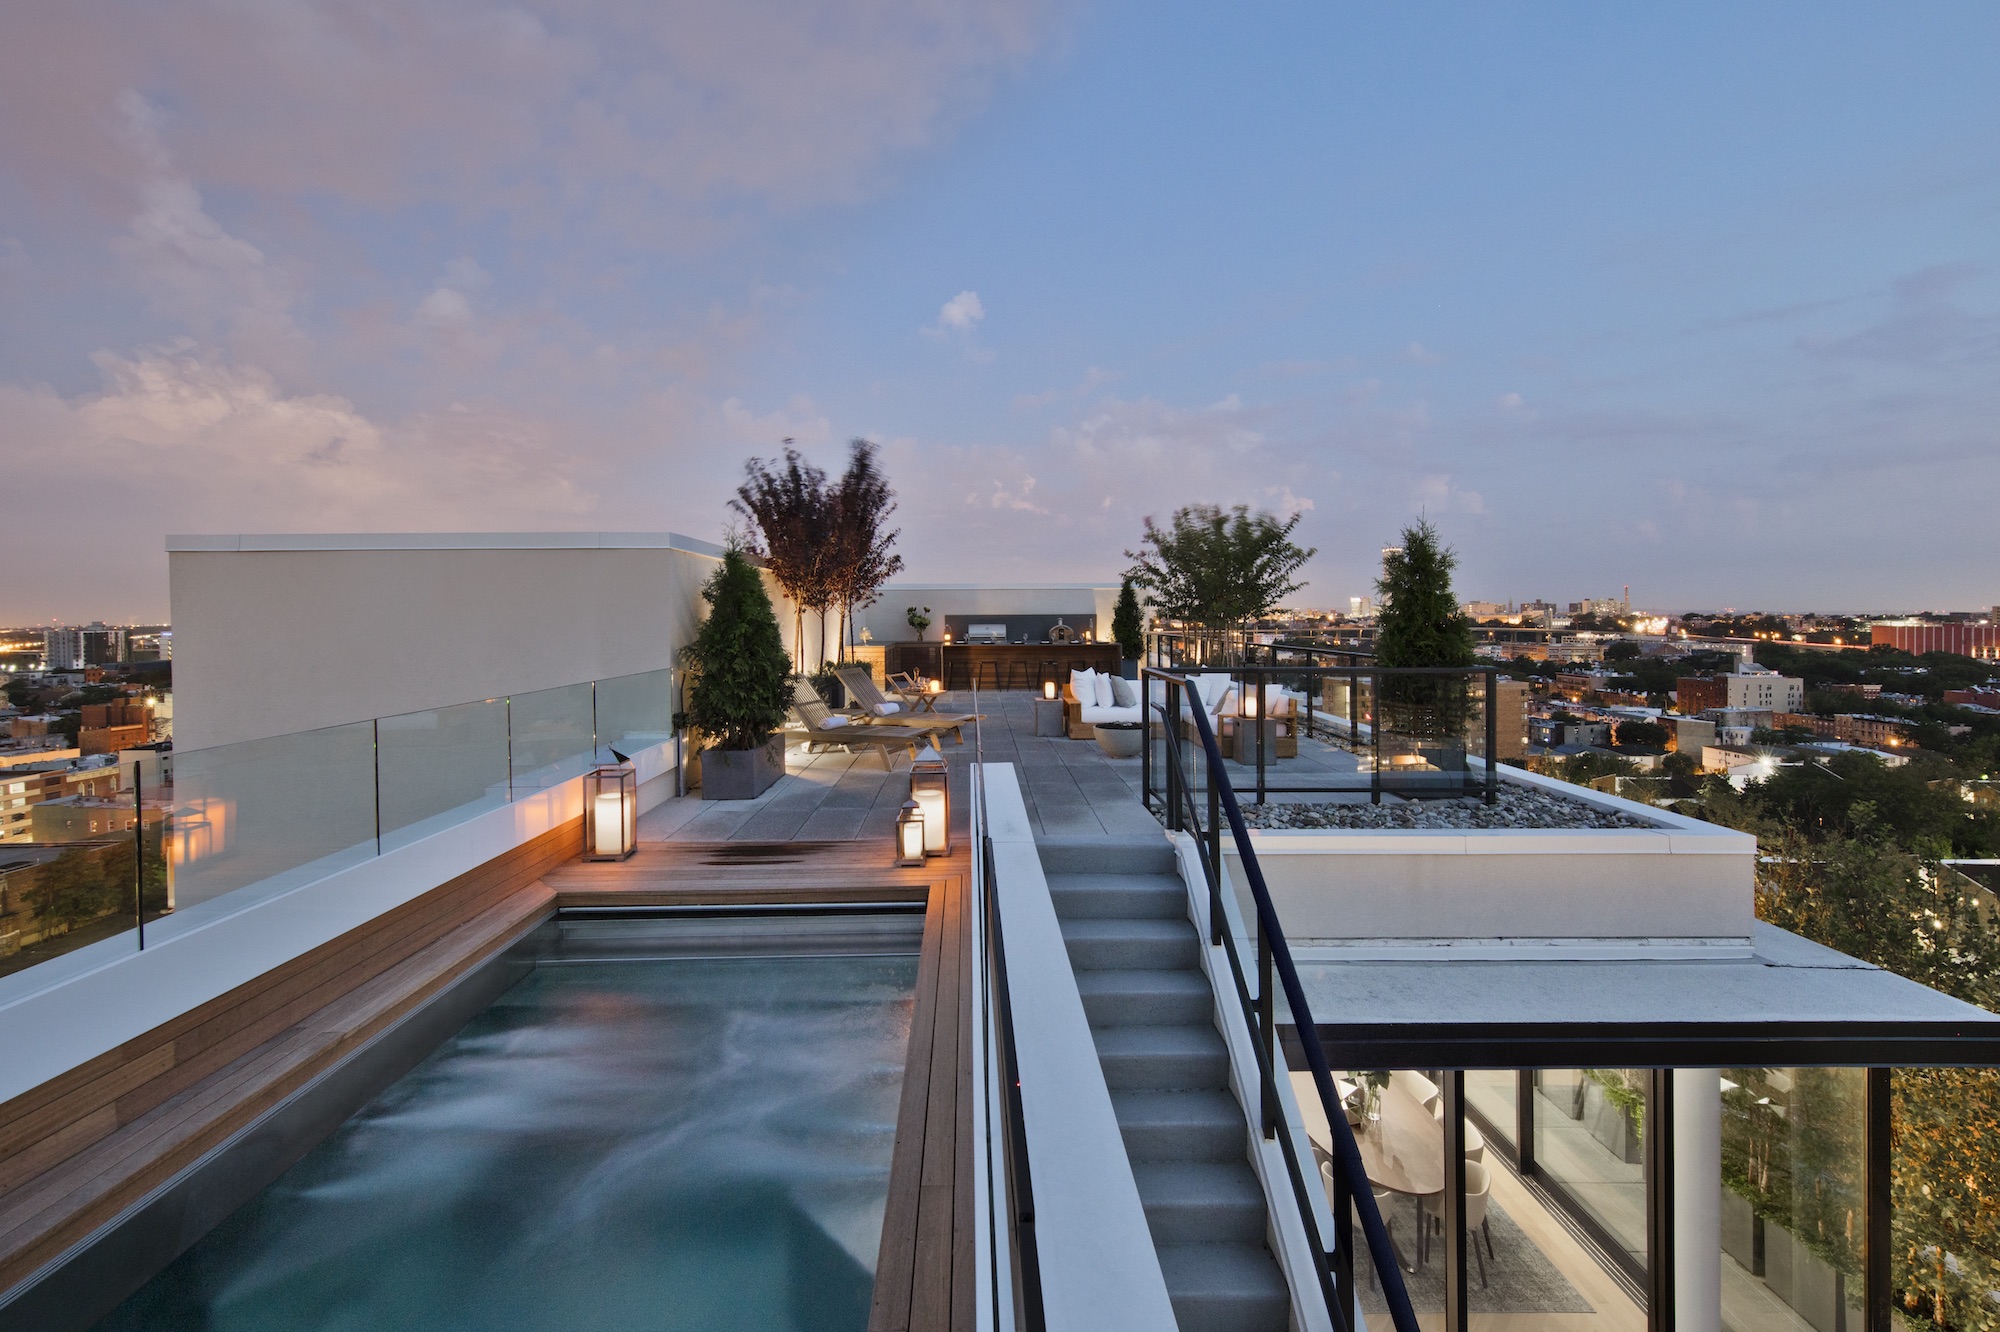 $5.49M condo with private infinity pool is Jersey City’s most expensive penthouse ever listed